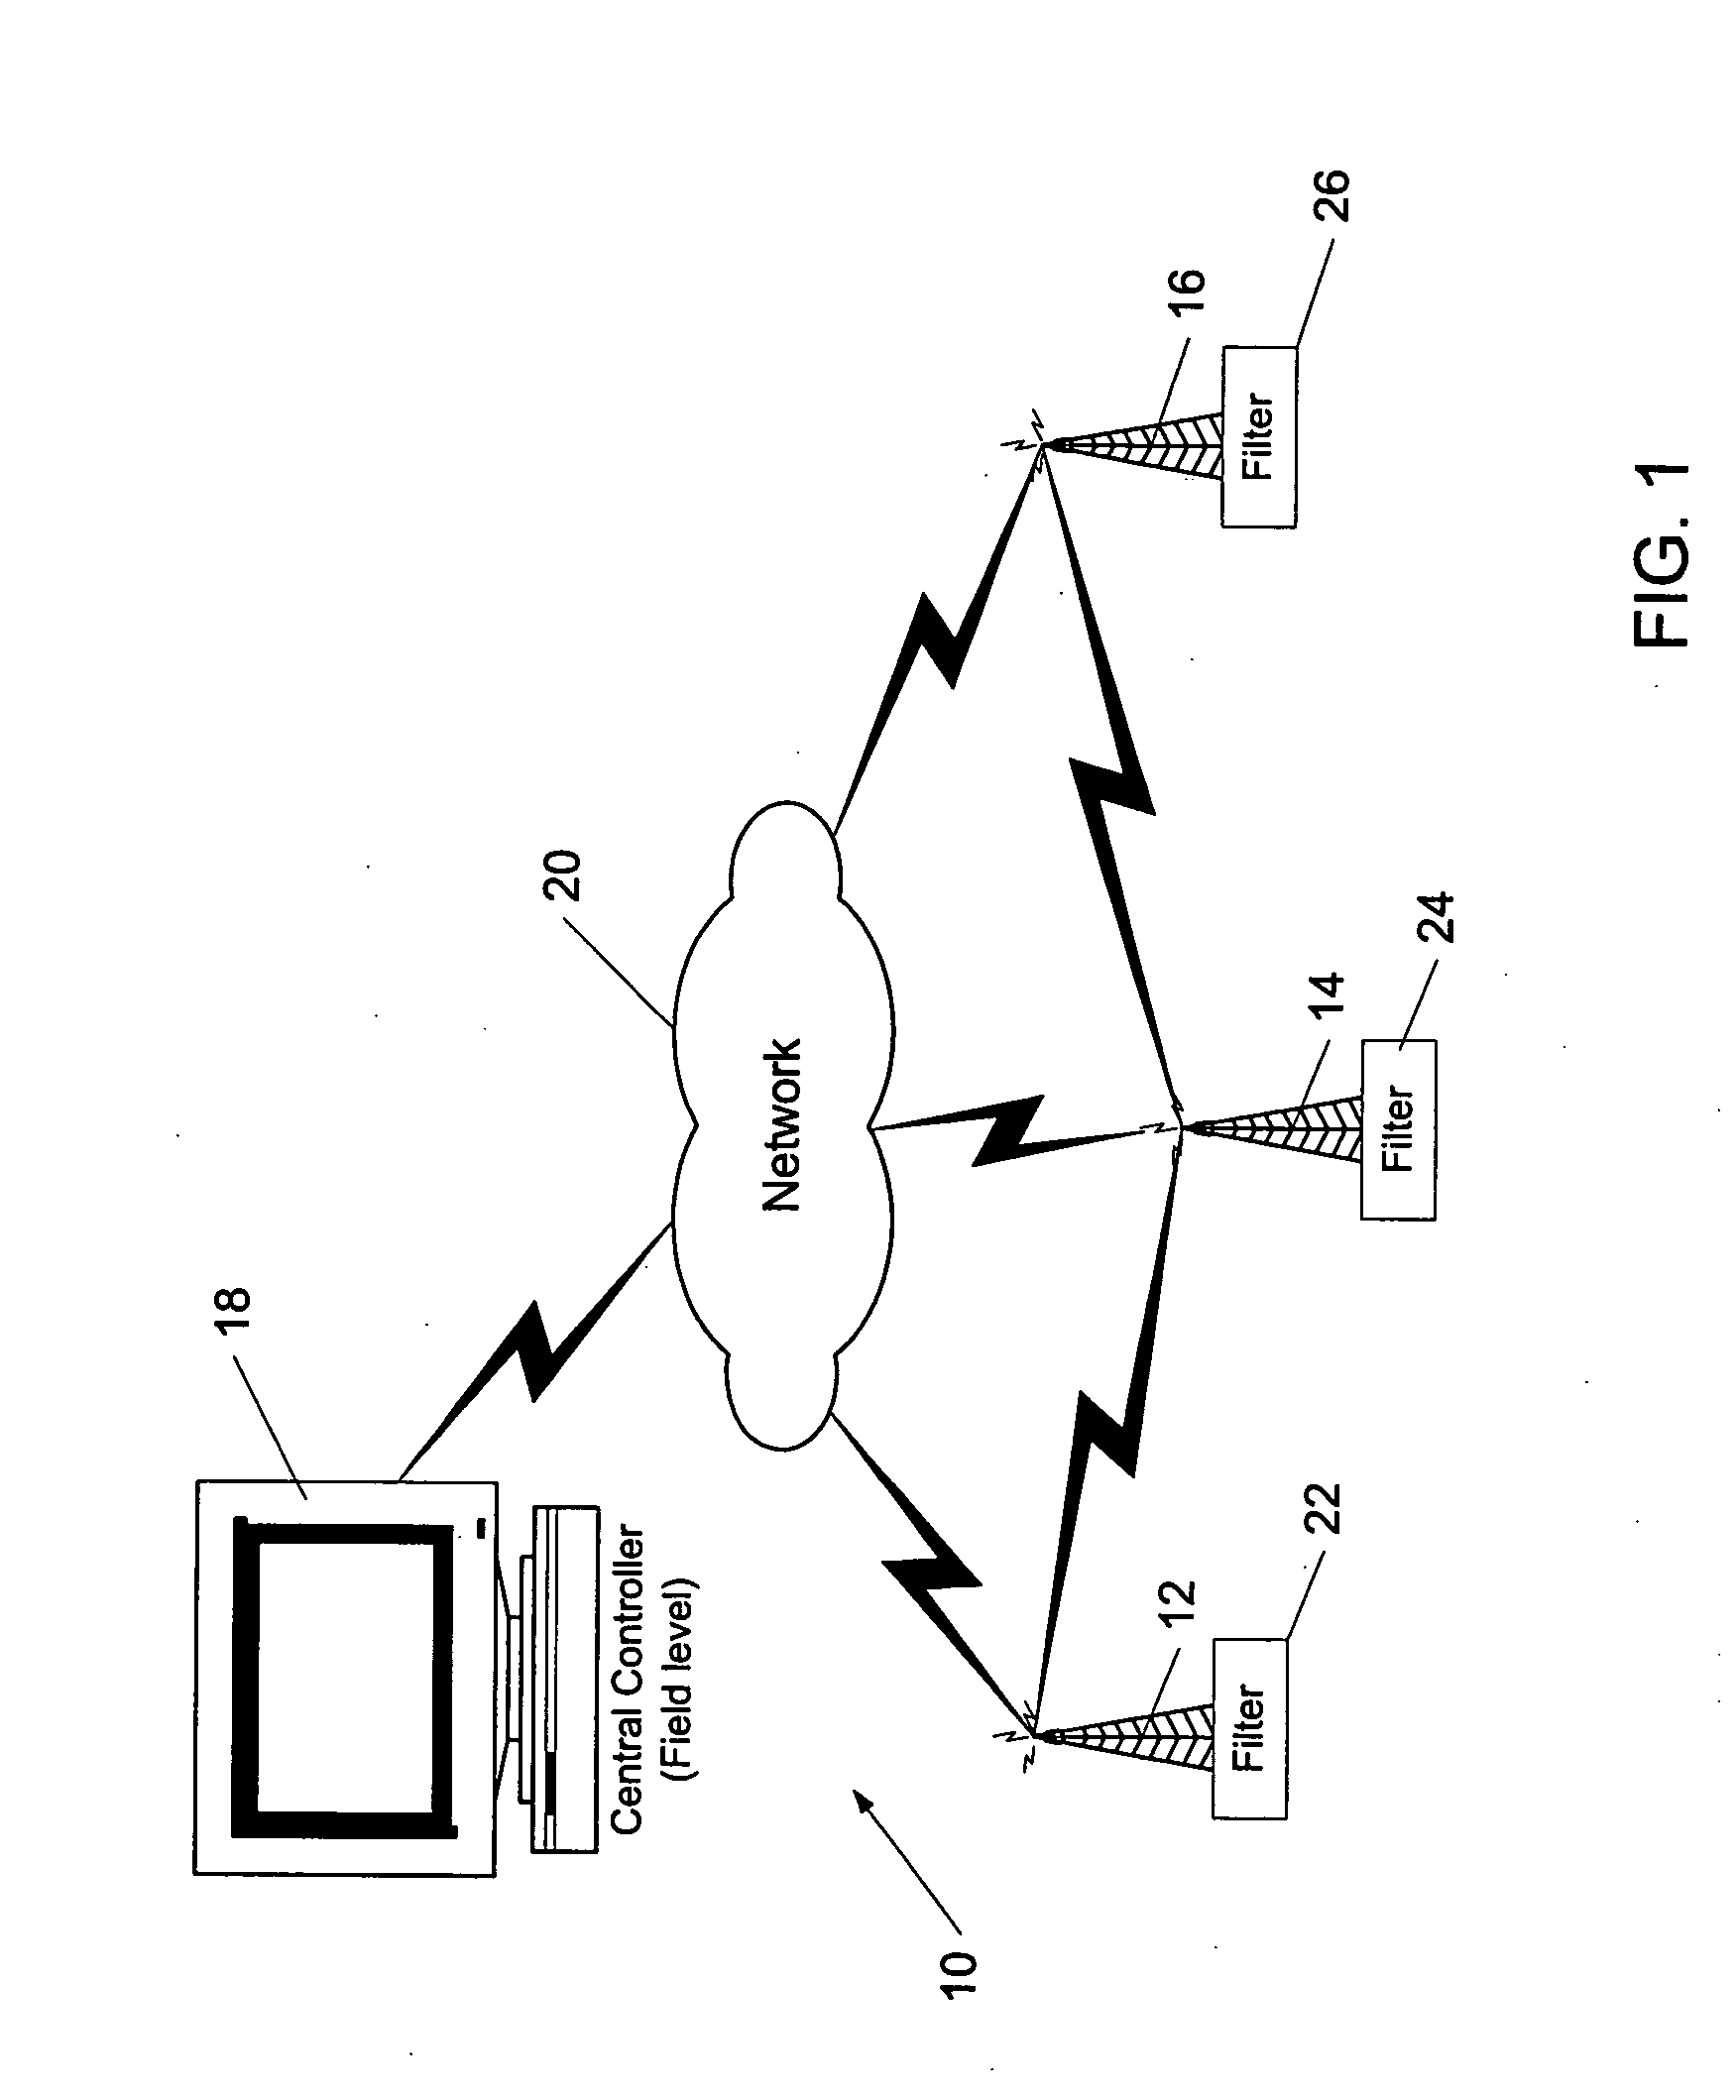 Real-time multistatic radar signal processing system and method